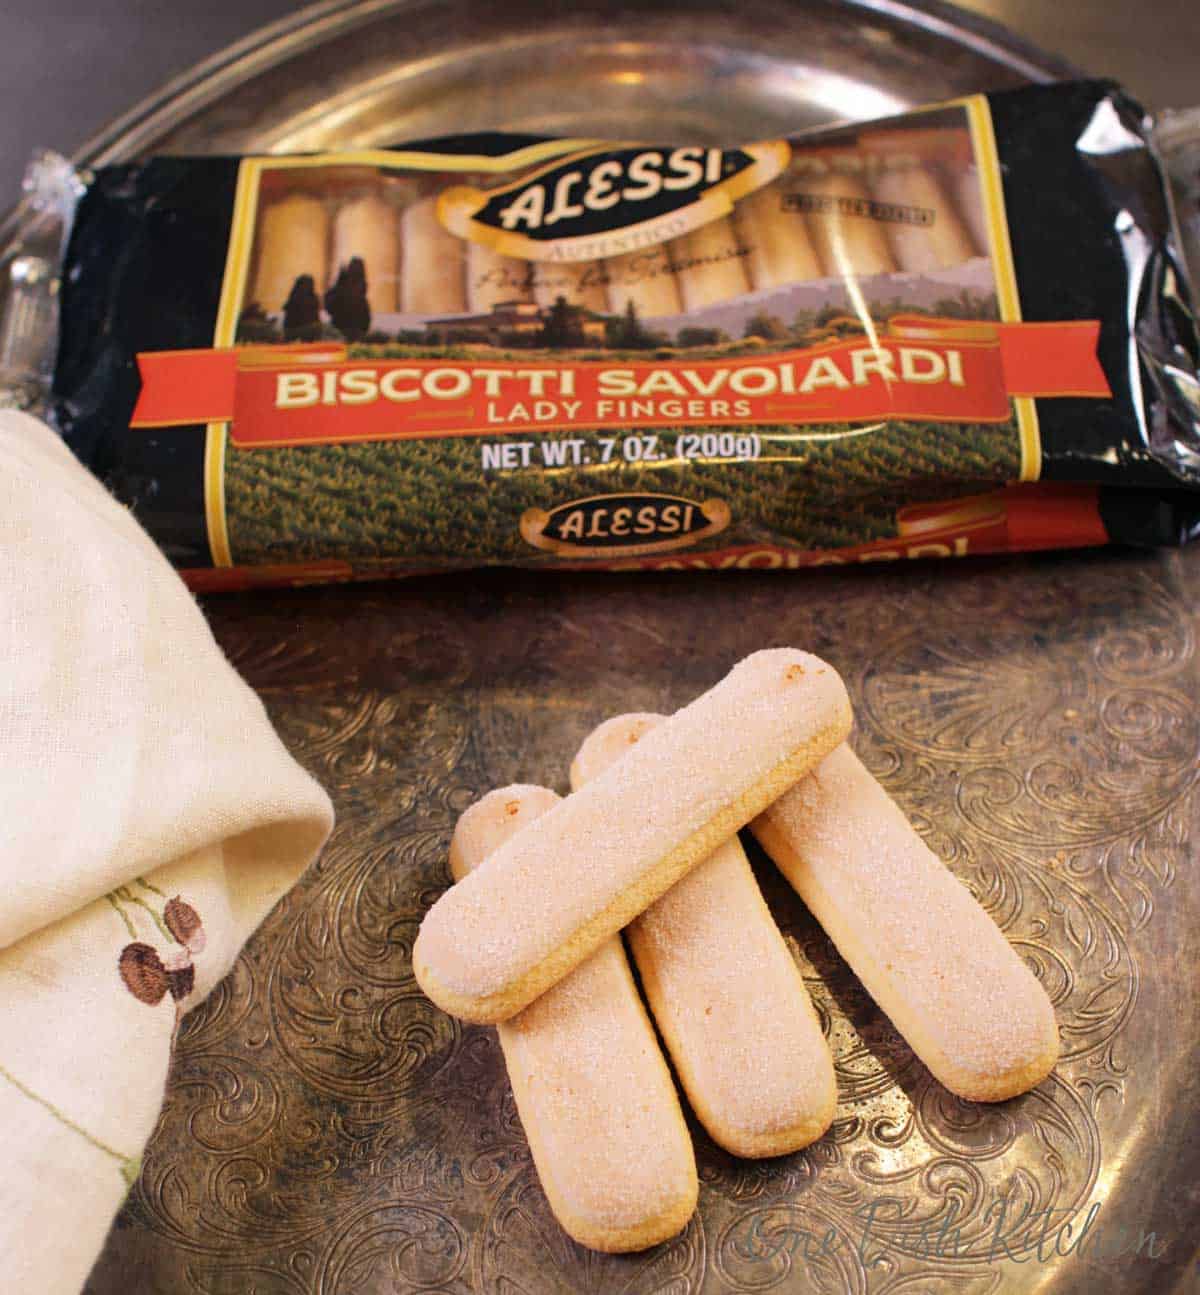 Biscotti Savoiardi package next to four lady fingers on a metal tray.